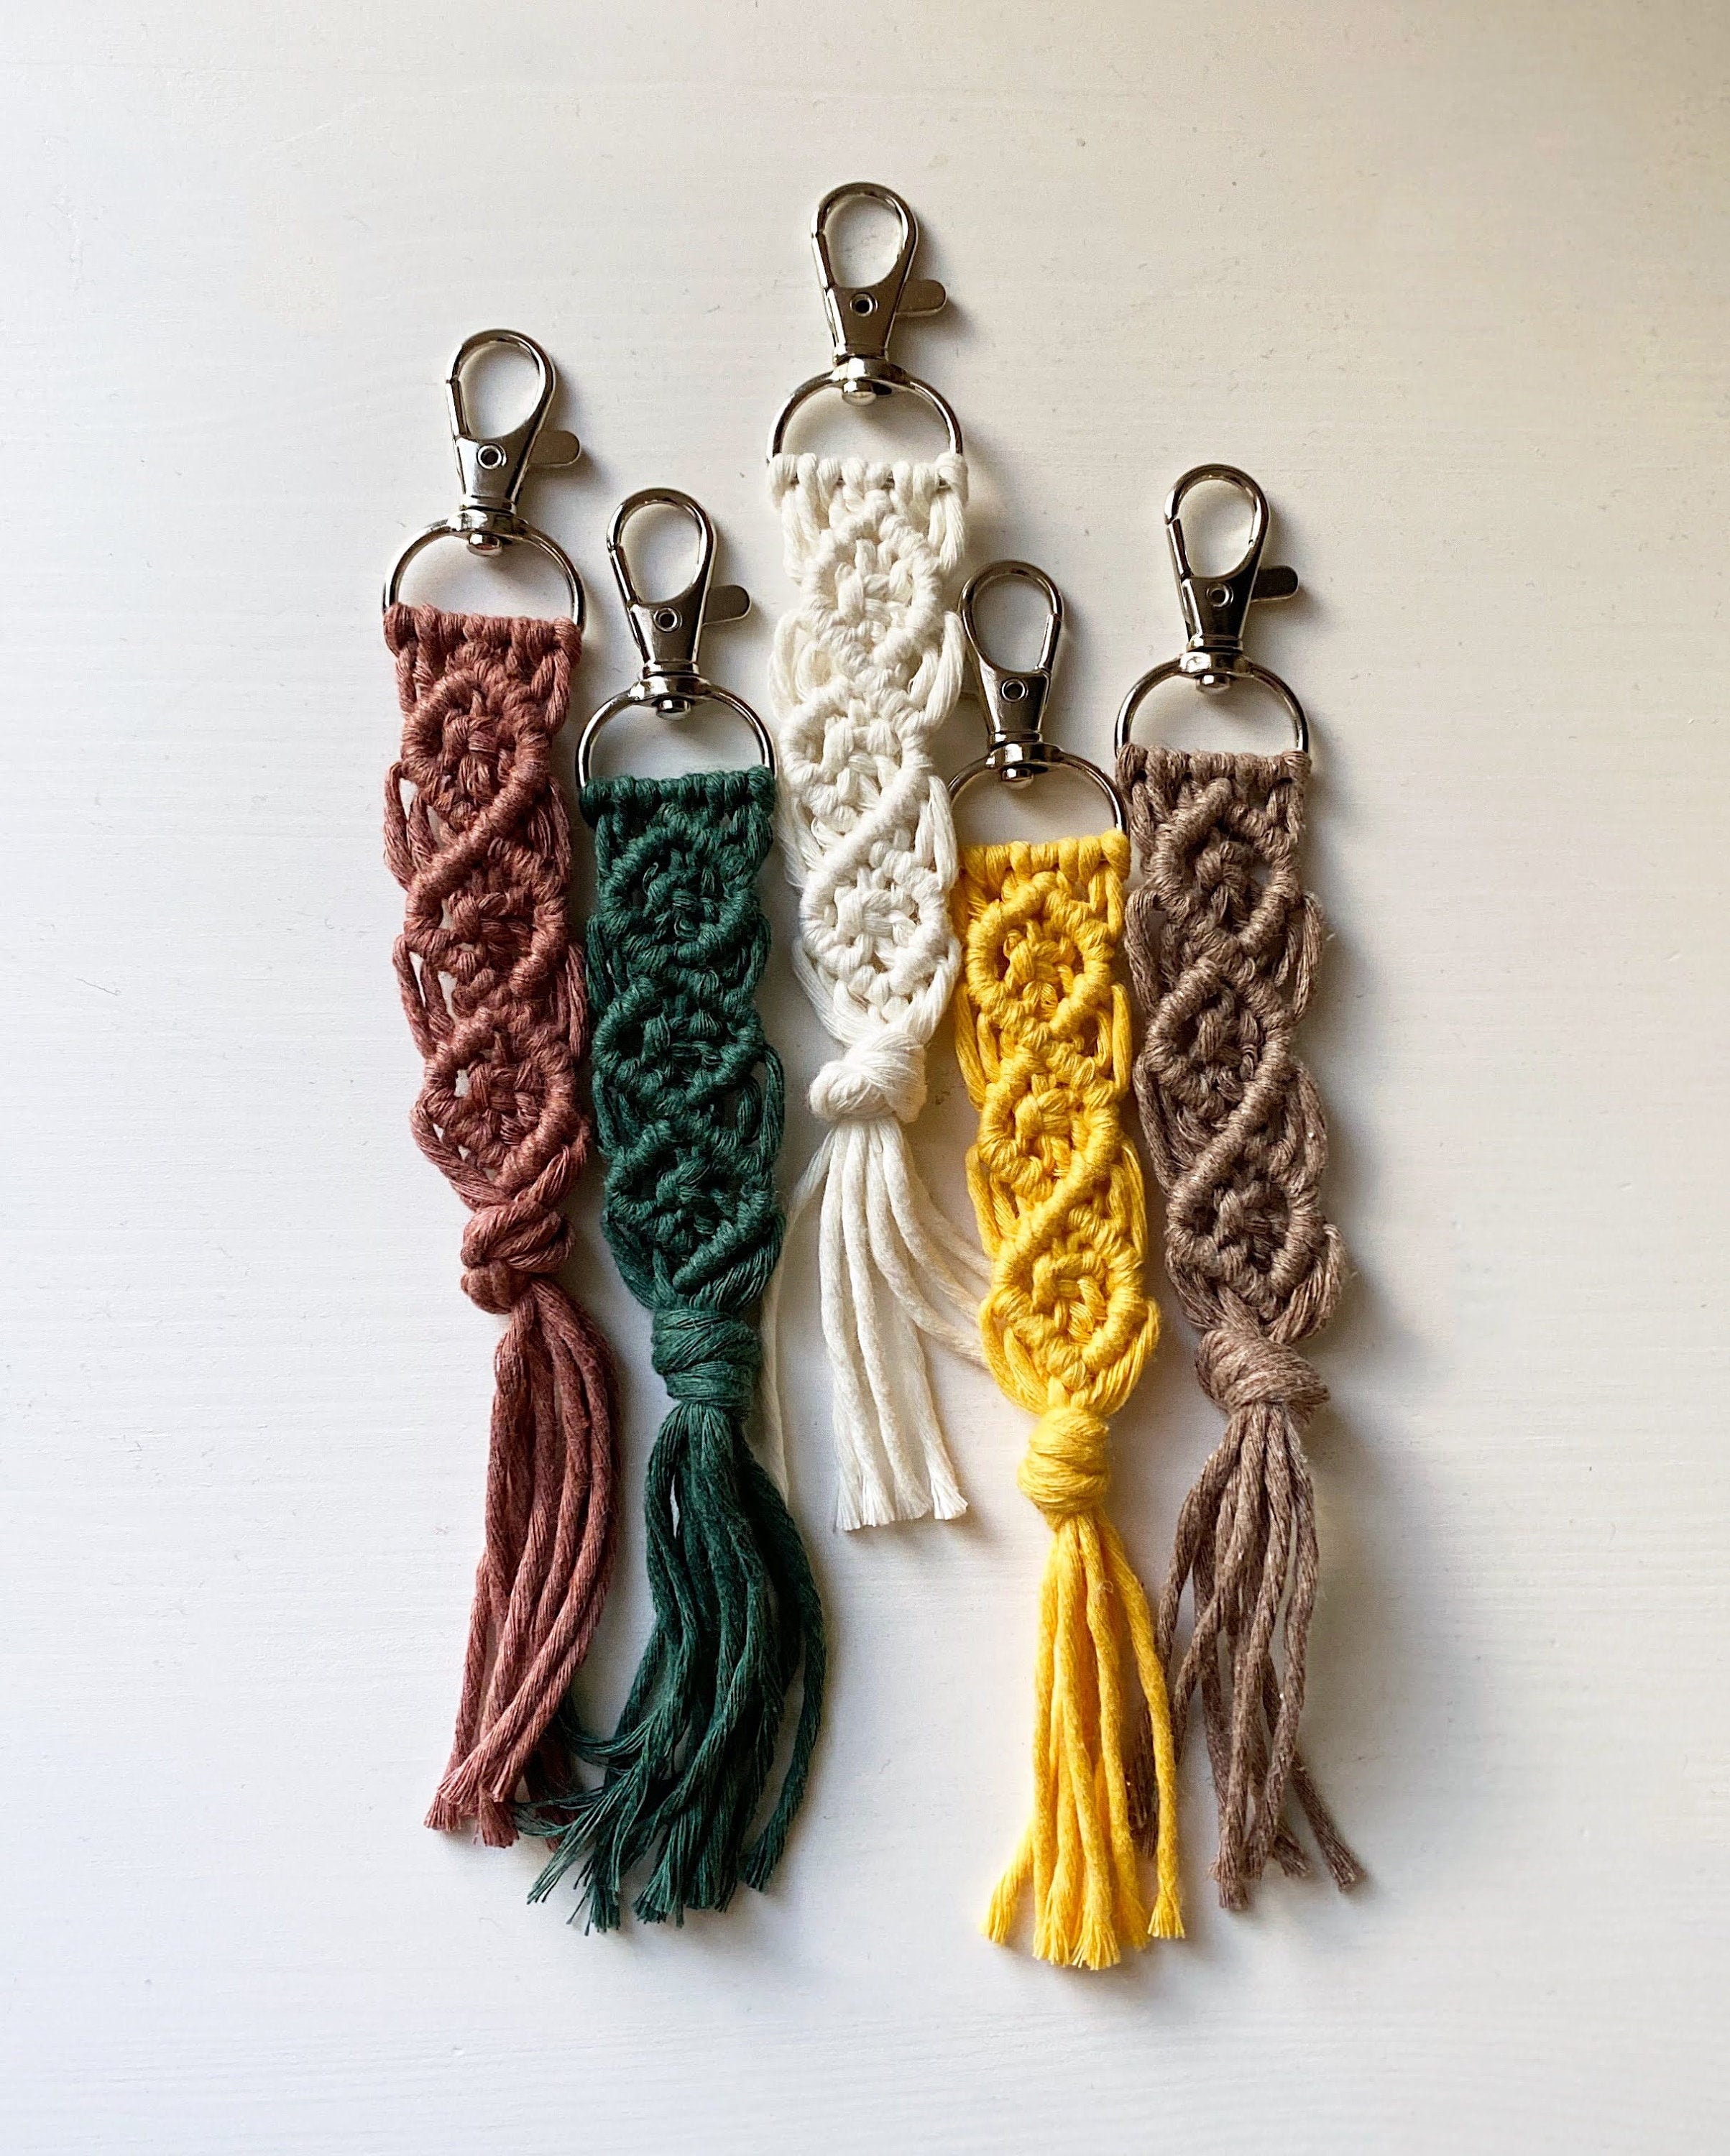 Macrame,keychain,pocket treeler made of 100/% recycled cotton in various colors,hand knotted,boho